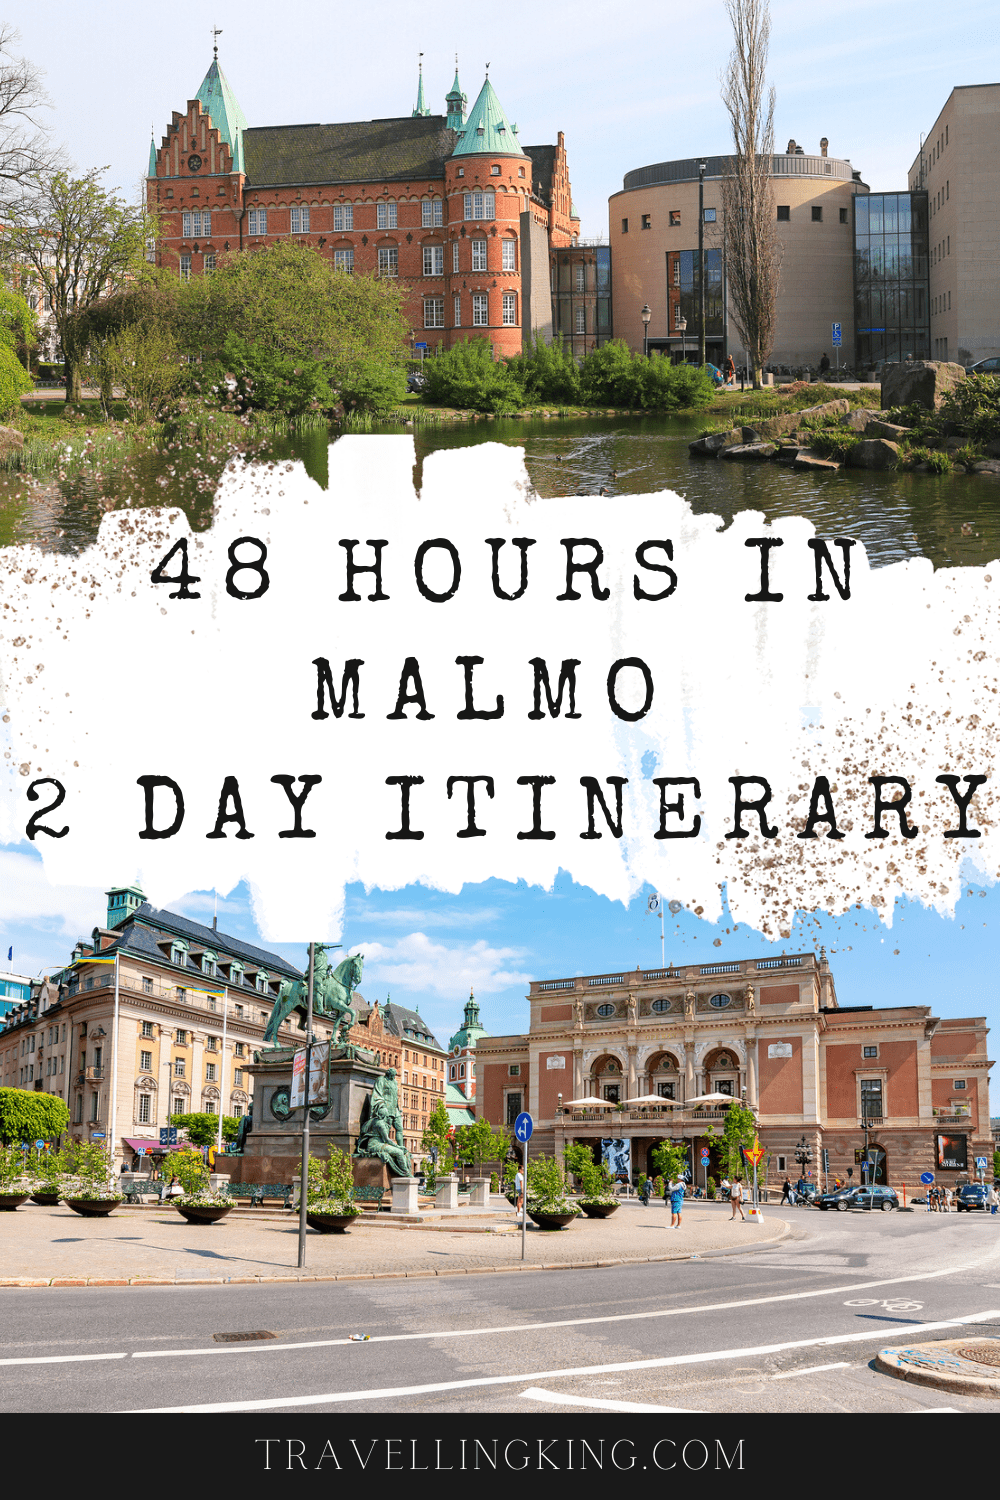 48 hours in Malmo - 2 Day Itinerary